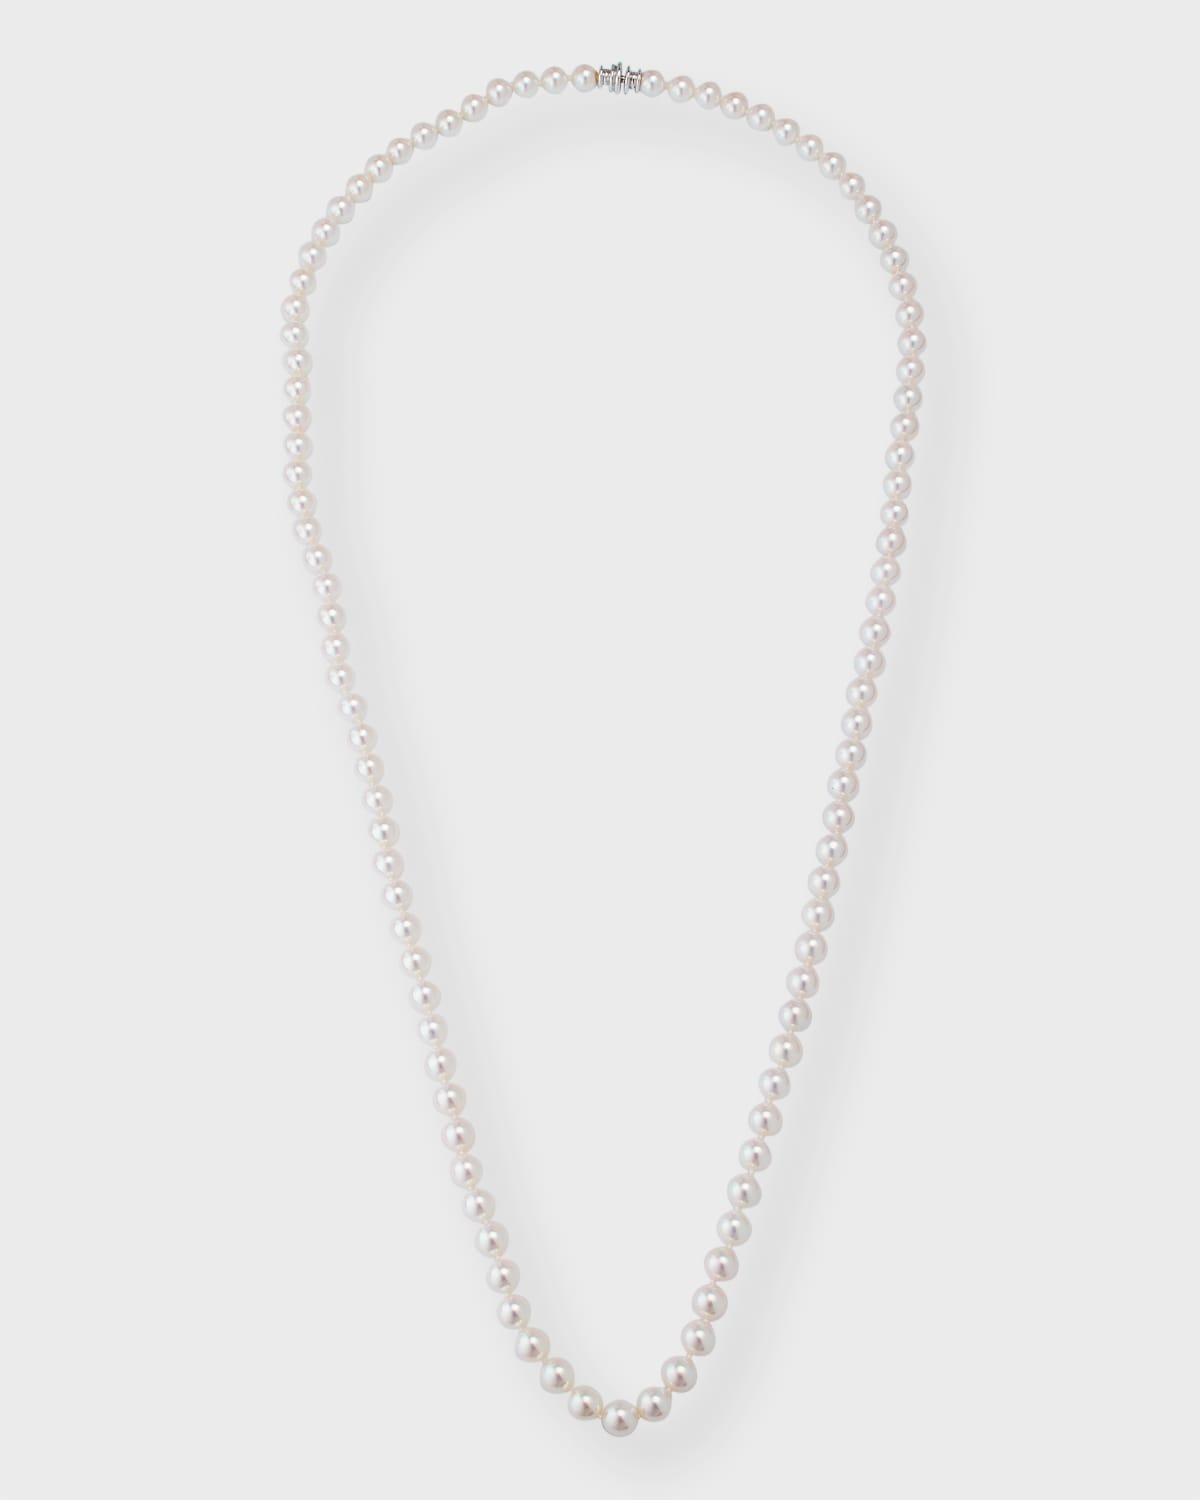 Akoya Pearl Long Necklace with 18K White Gold Clasp, 32"L